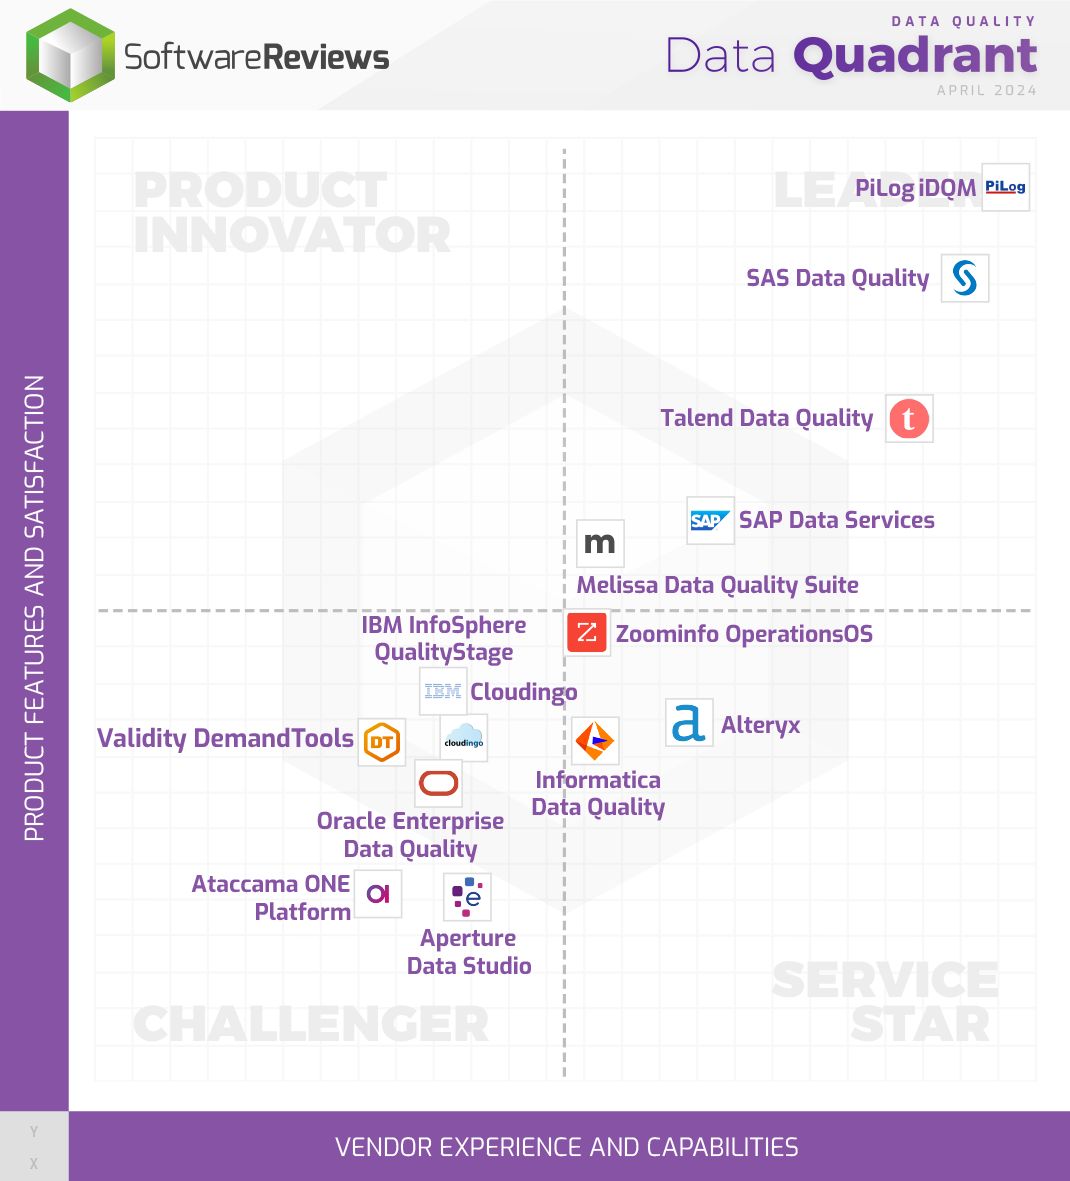 We are #honoured to be recognized as a #leader in the 2024 #Data Quadrant #Awards in the Data #Quality tools category by #software reviews.

For more details : bit.ly/3Fxe1zn

#DataQuality #Software #Awards2024 #PiLogGroup